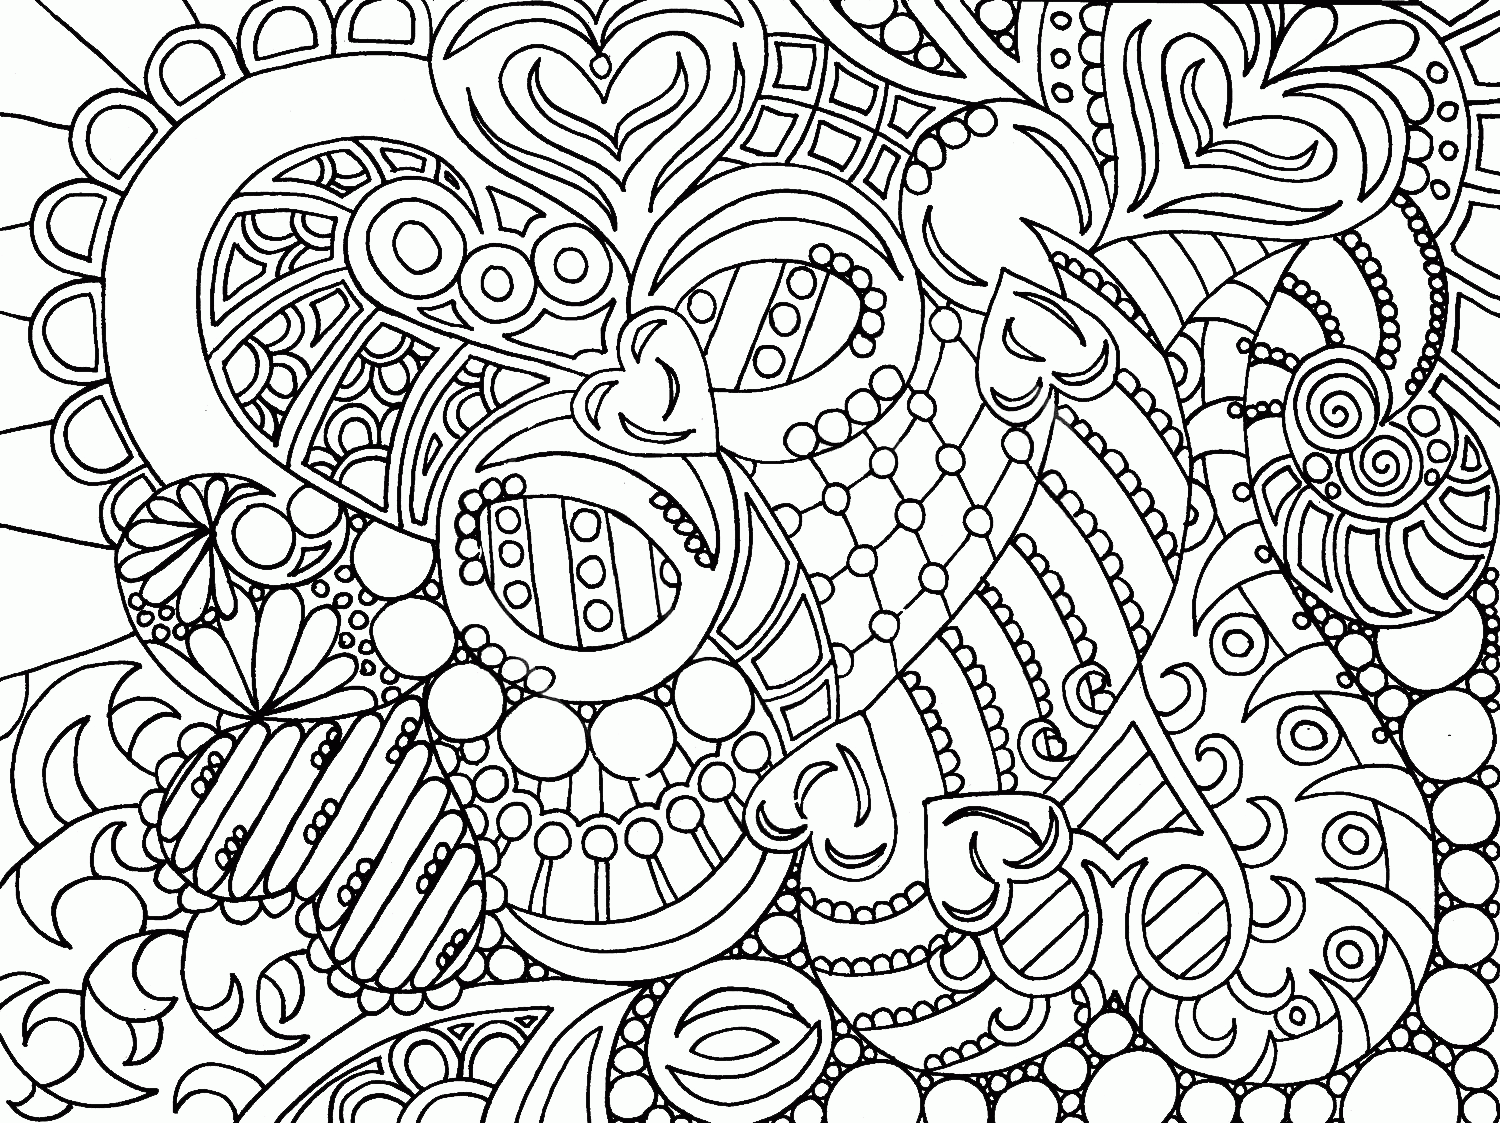 Amazing of Simple Abstract Coloring Page Printable For Ad #3305